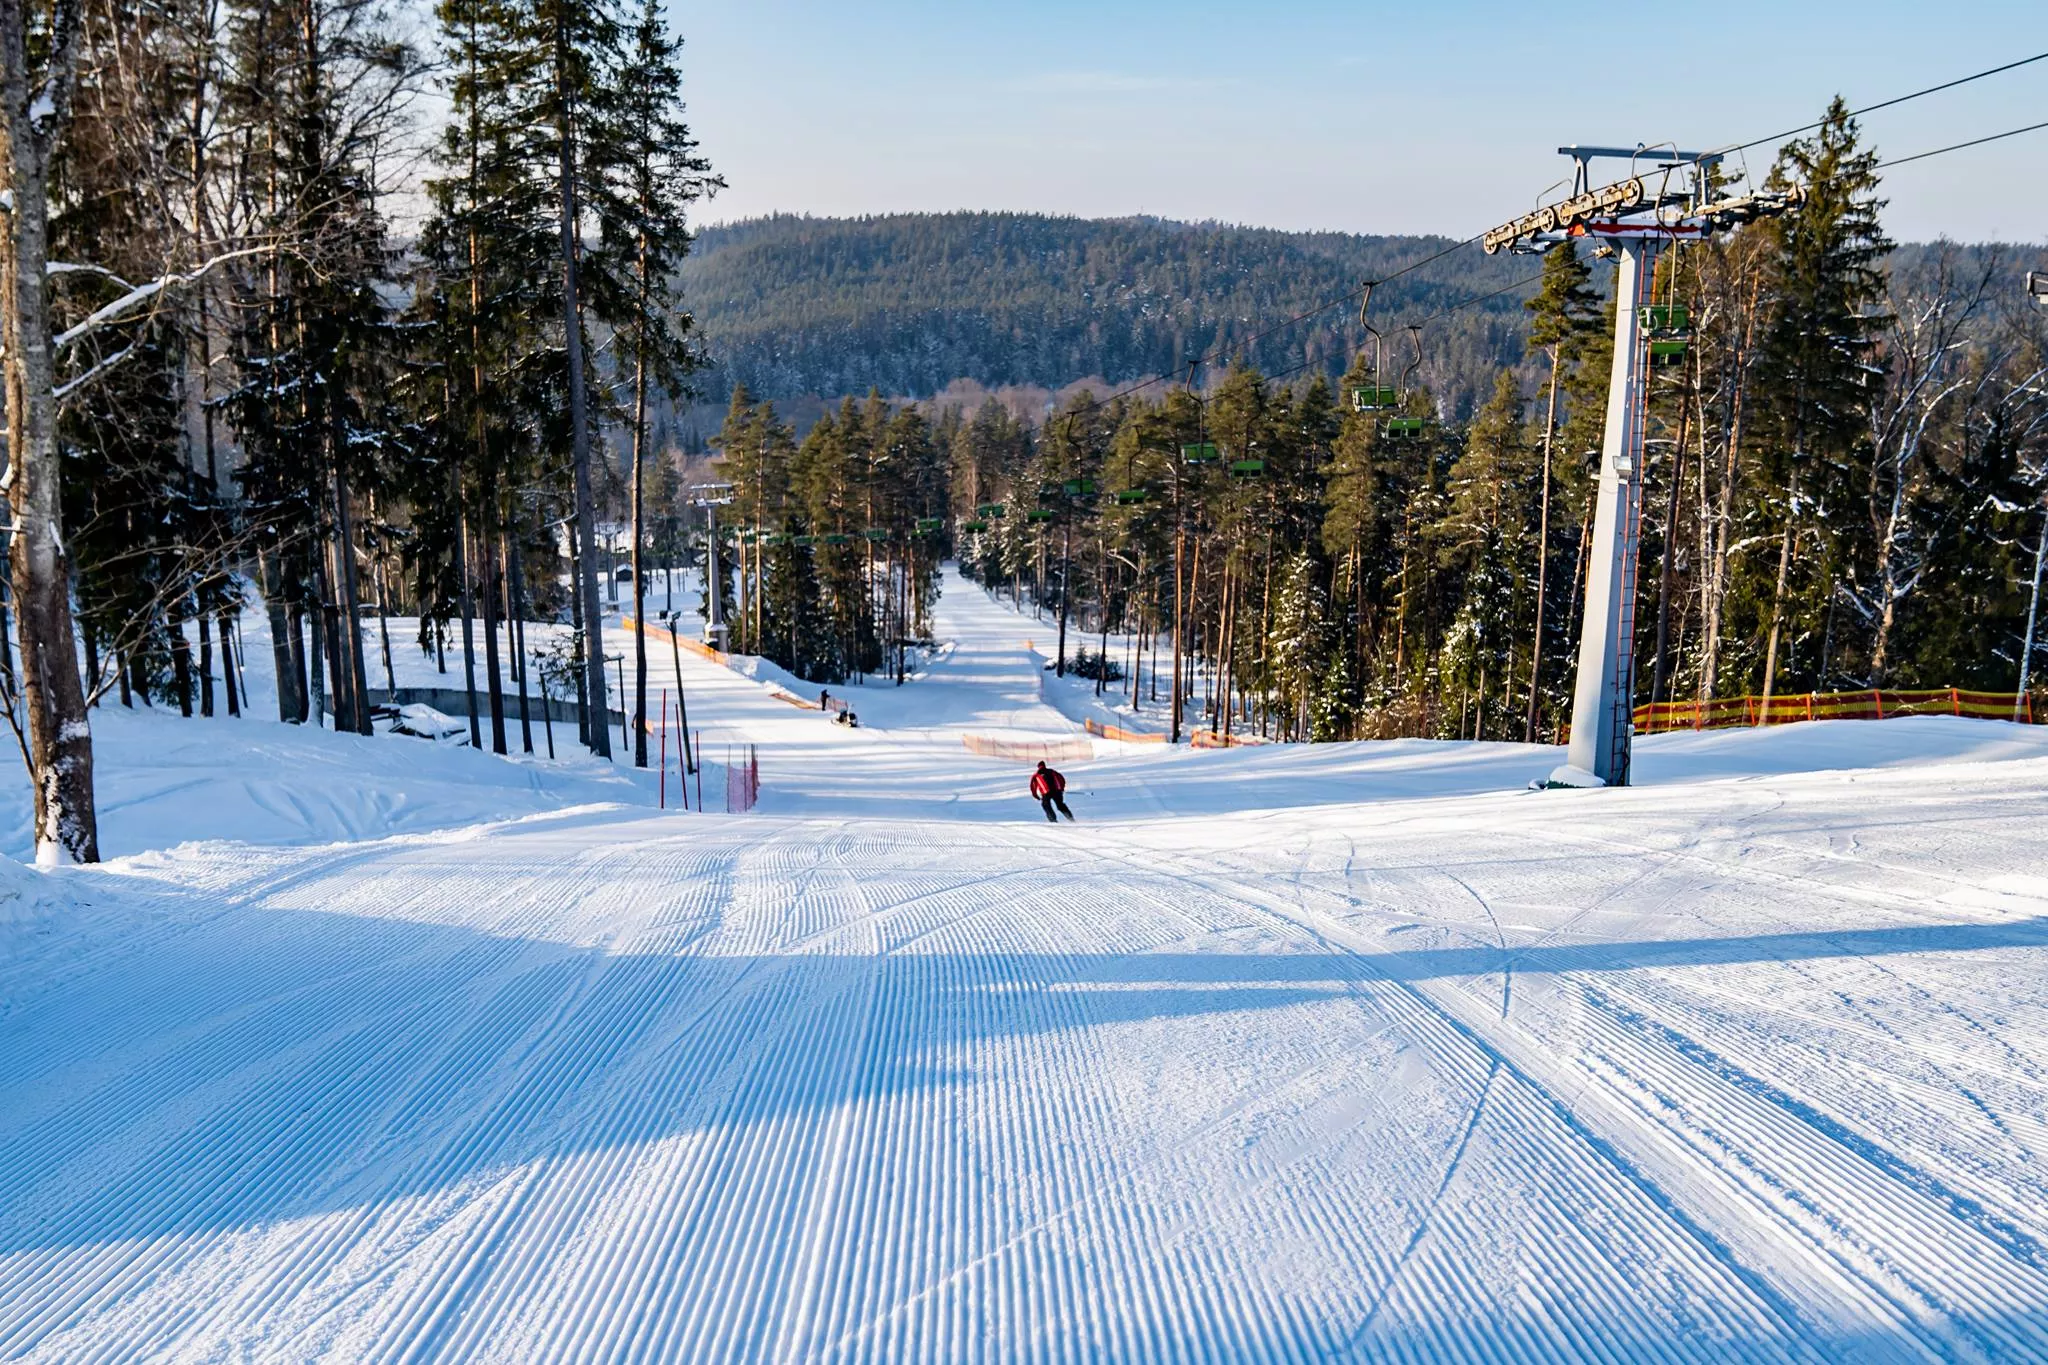 Ozolkalns in Latvia, Europe | Snowboarding,Skiing - Rated 3.9